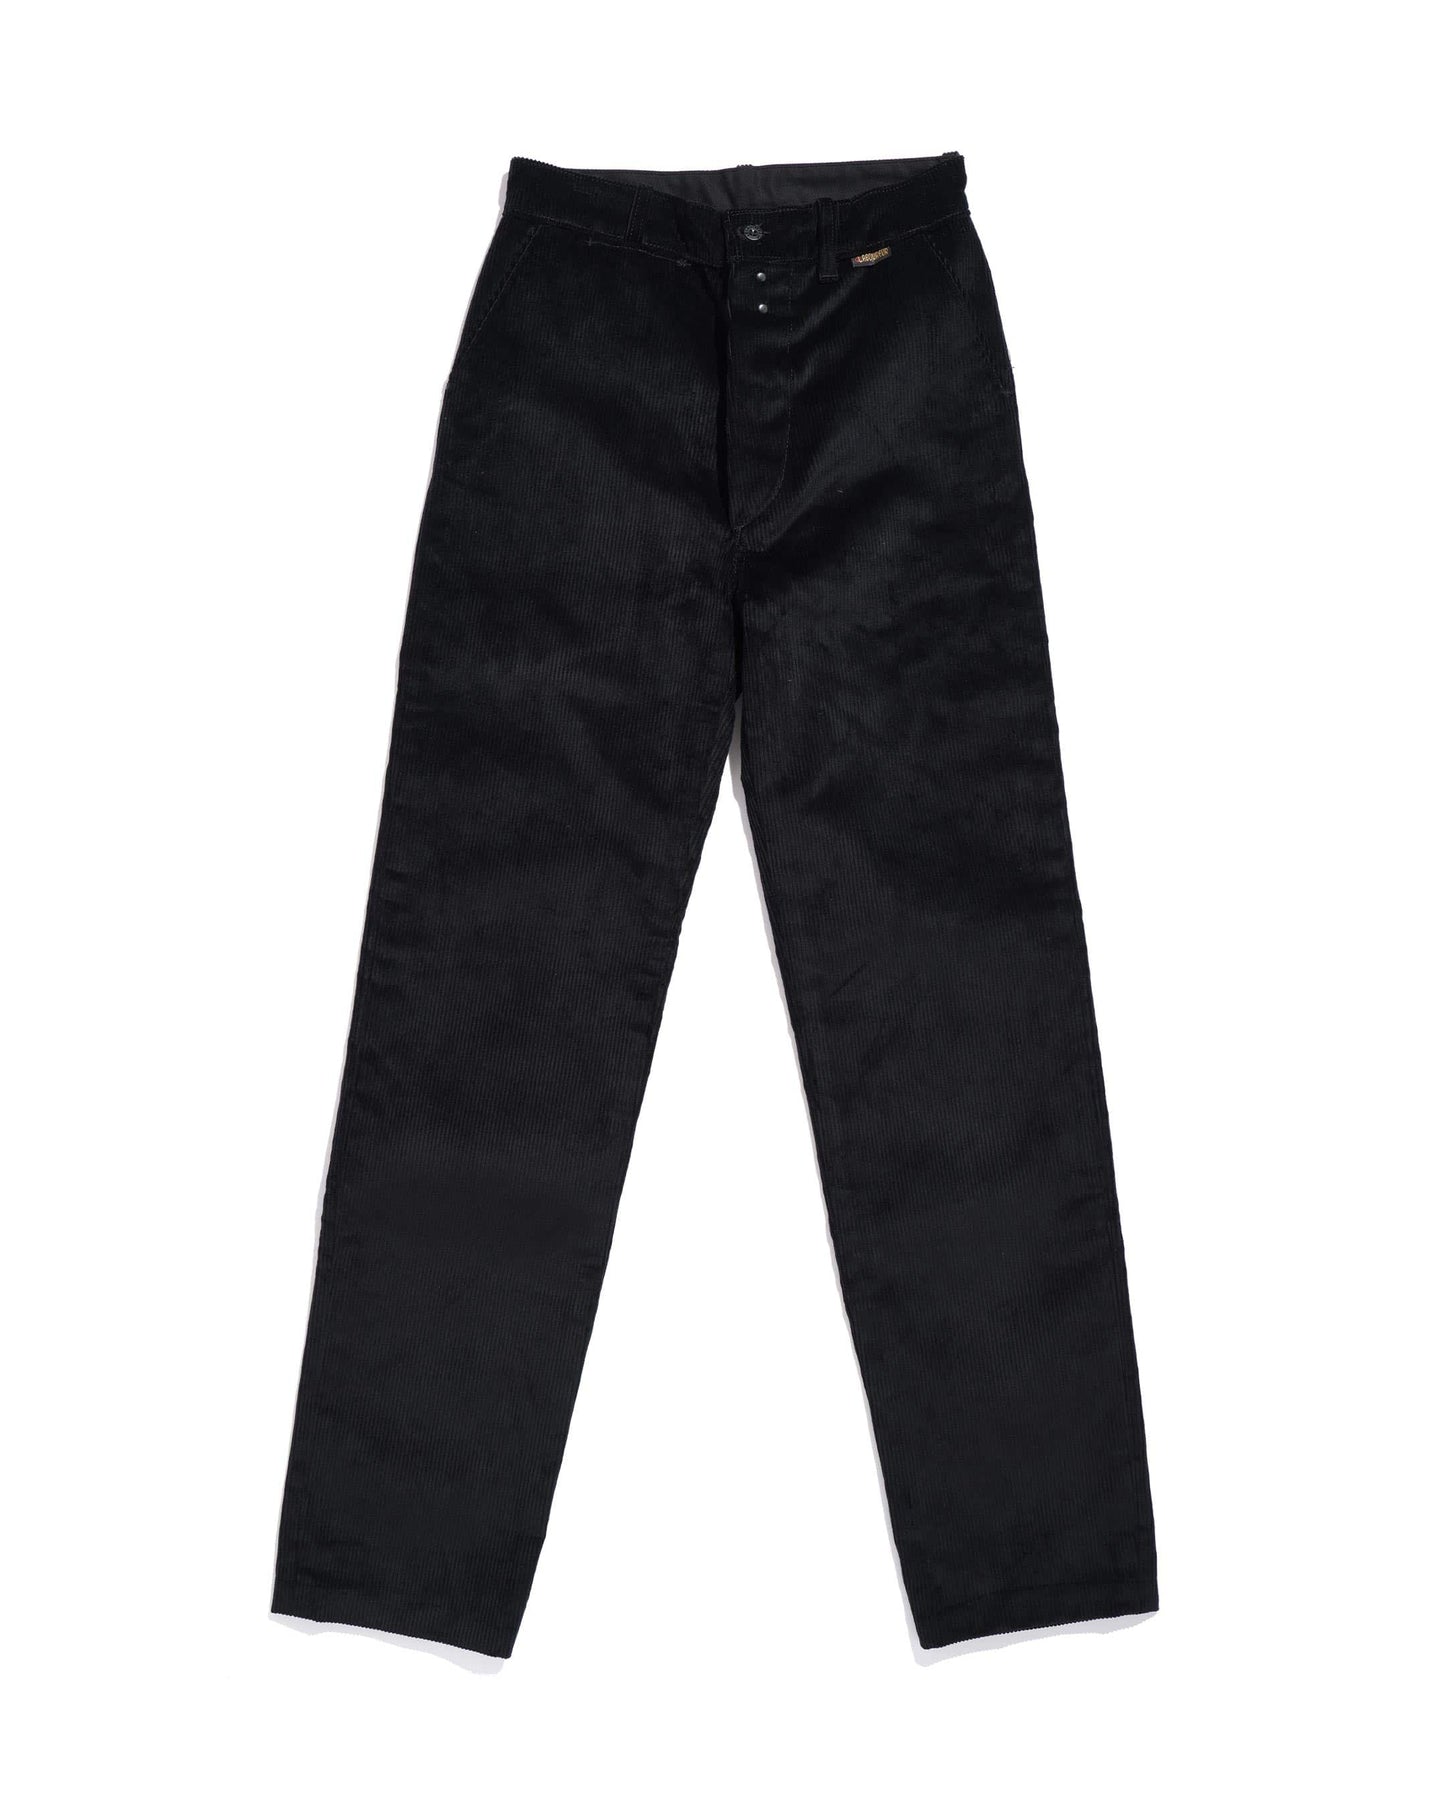 Straight black corduroy pants (discounted size 36)